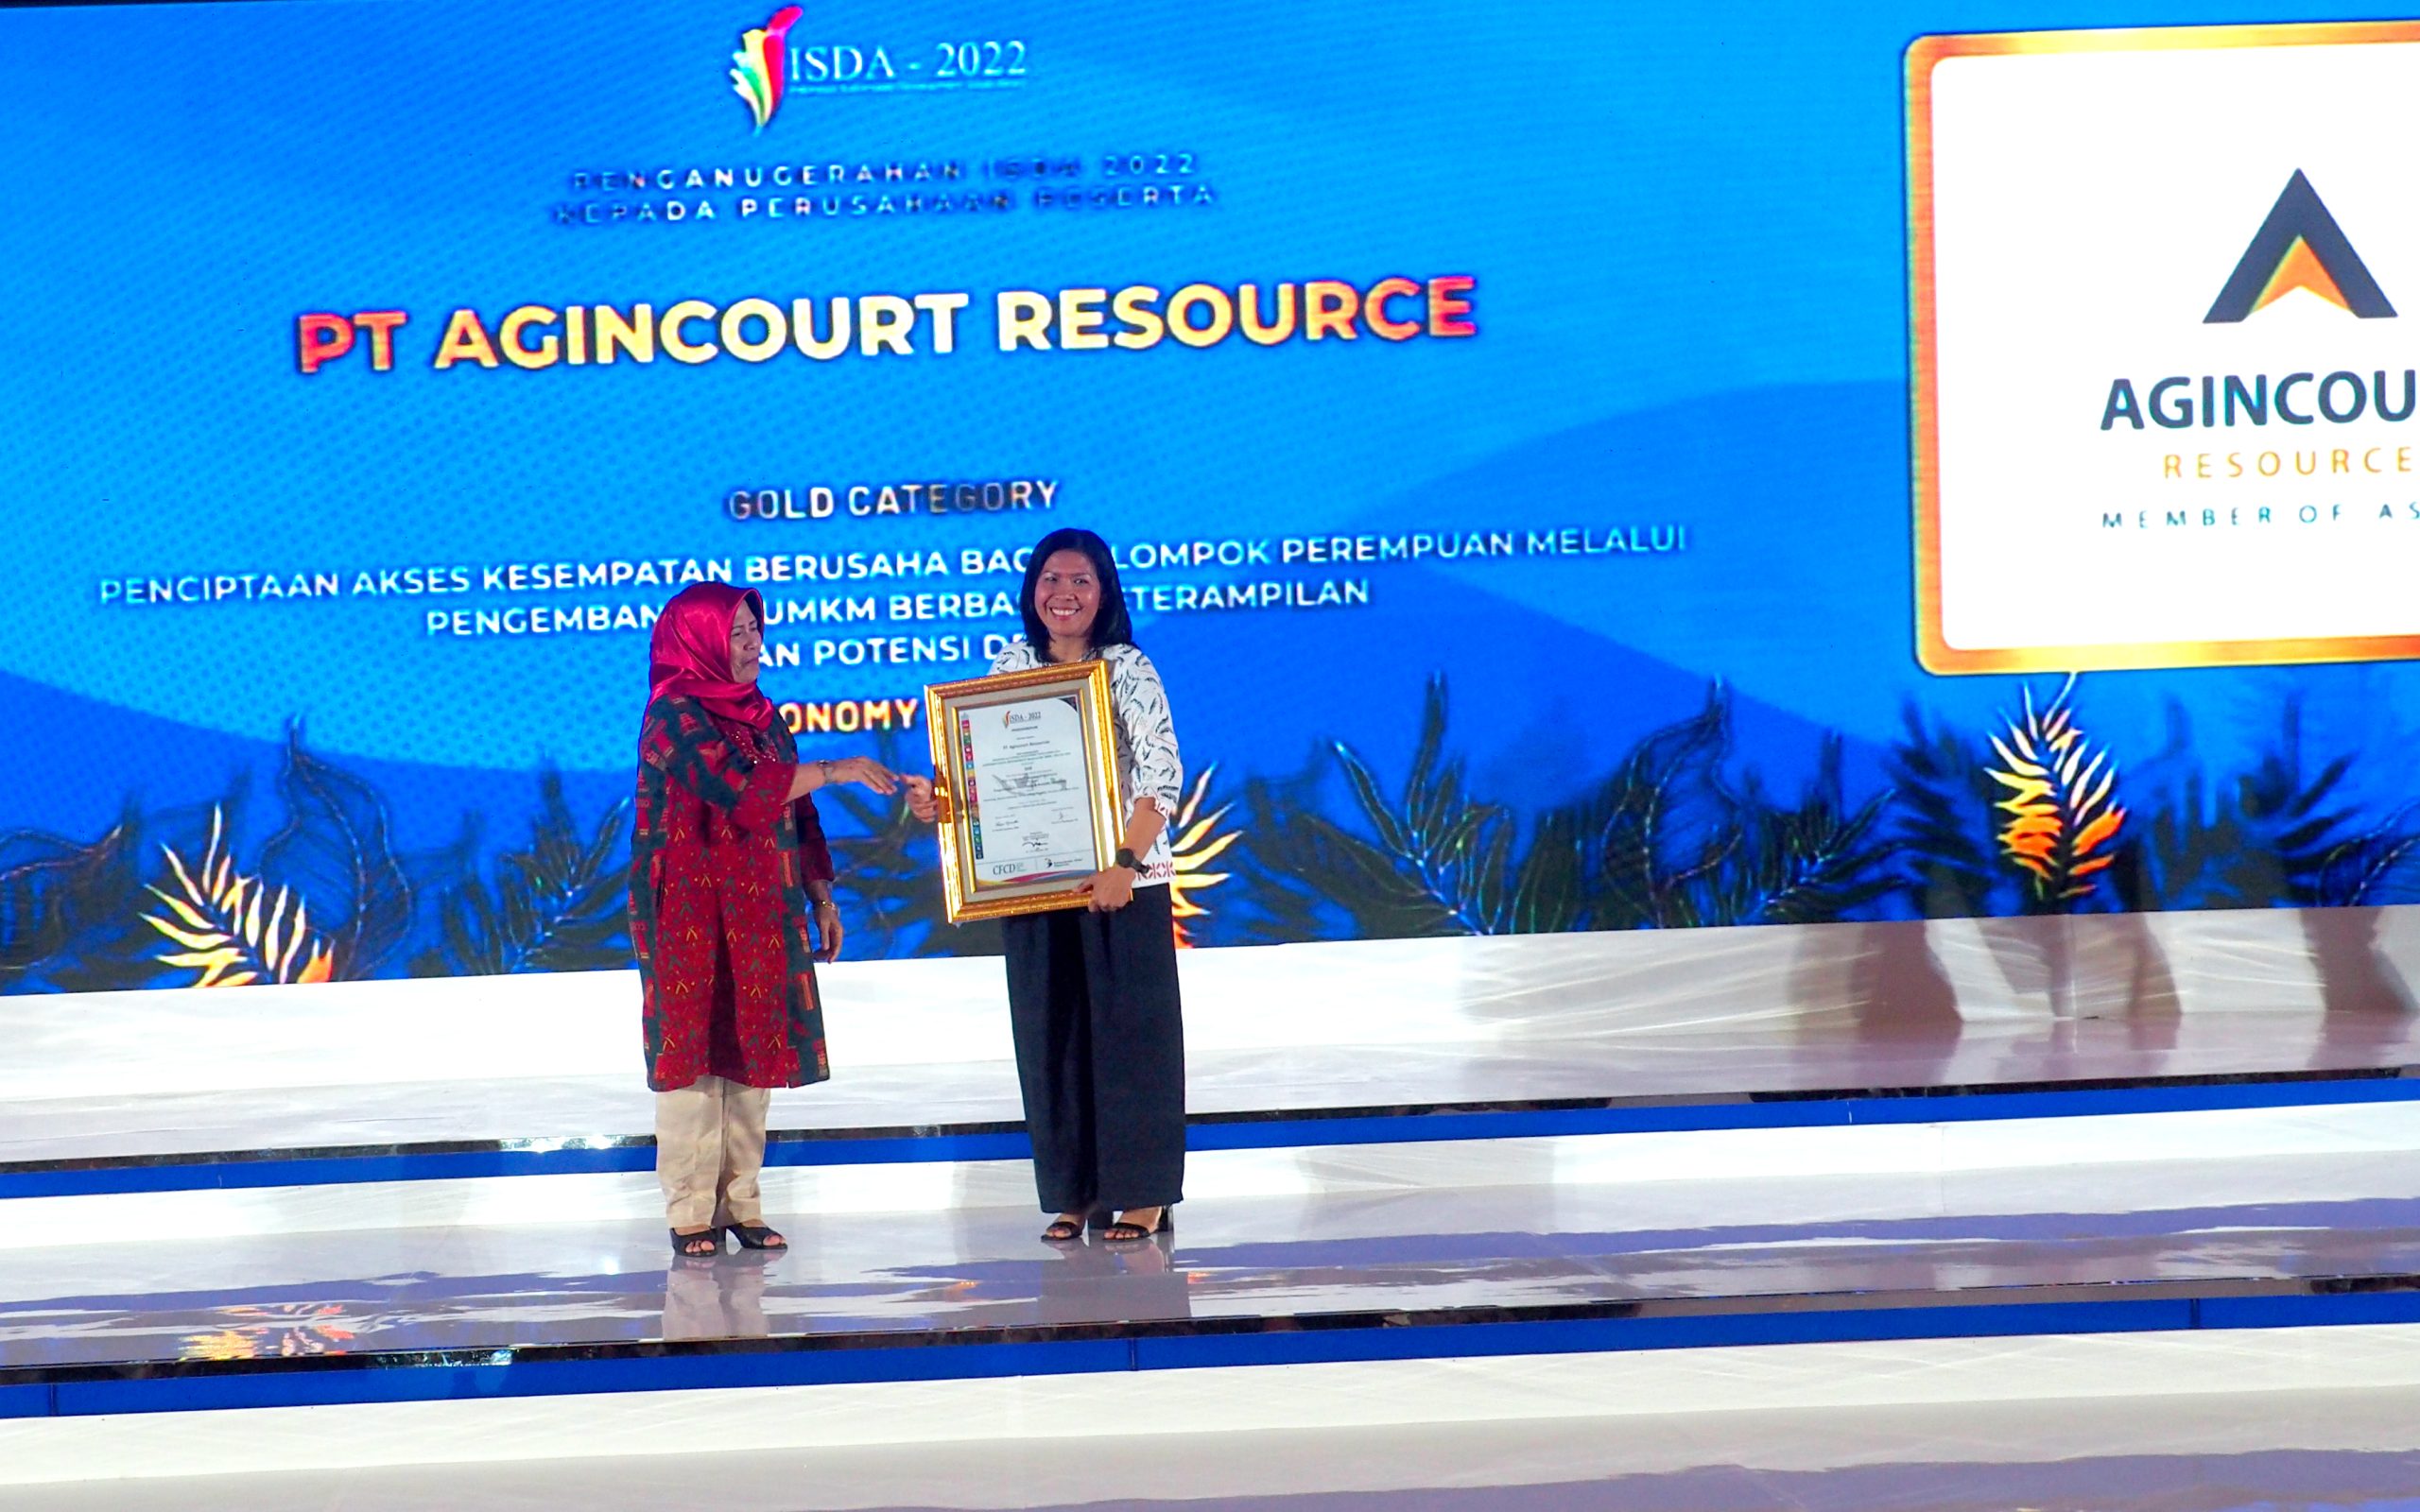 Gold Awards Creating Access to Business Opportunities for Women's Groups through the Development of MSMEs Based on Skills and Village Potential on Indonesian Sustainable Development Goals Award (ISDA) 2022